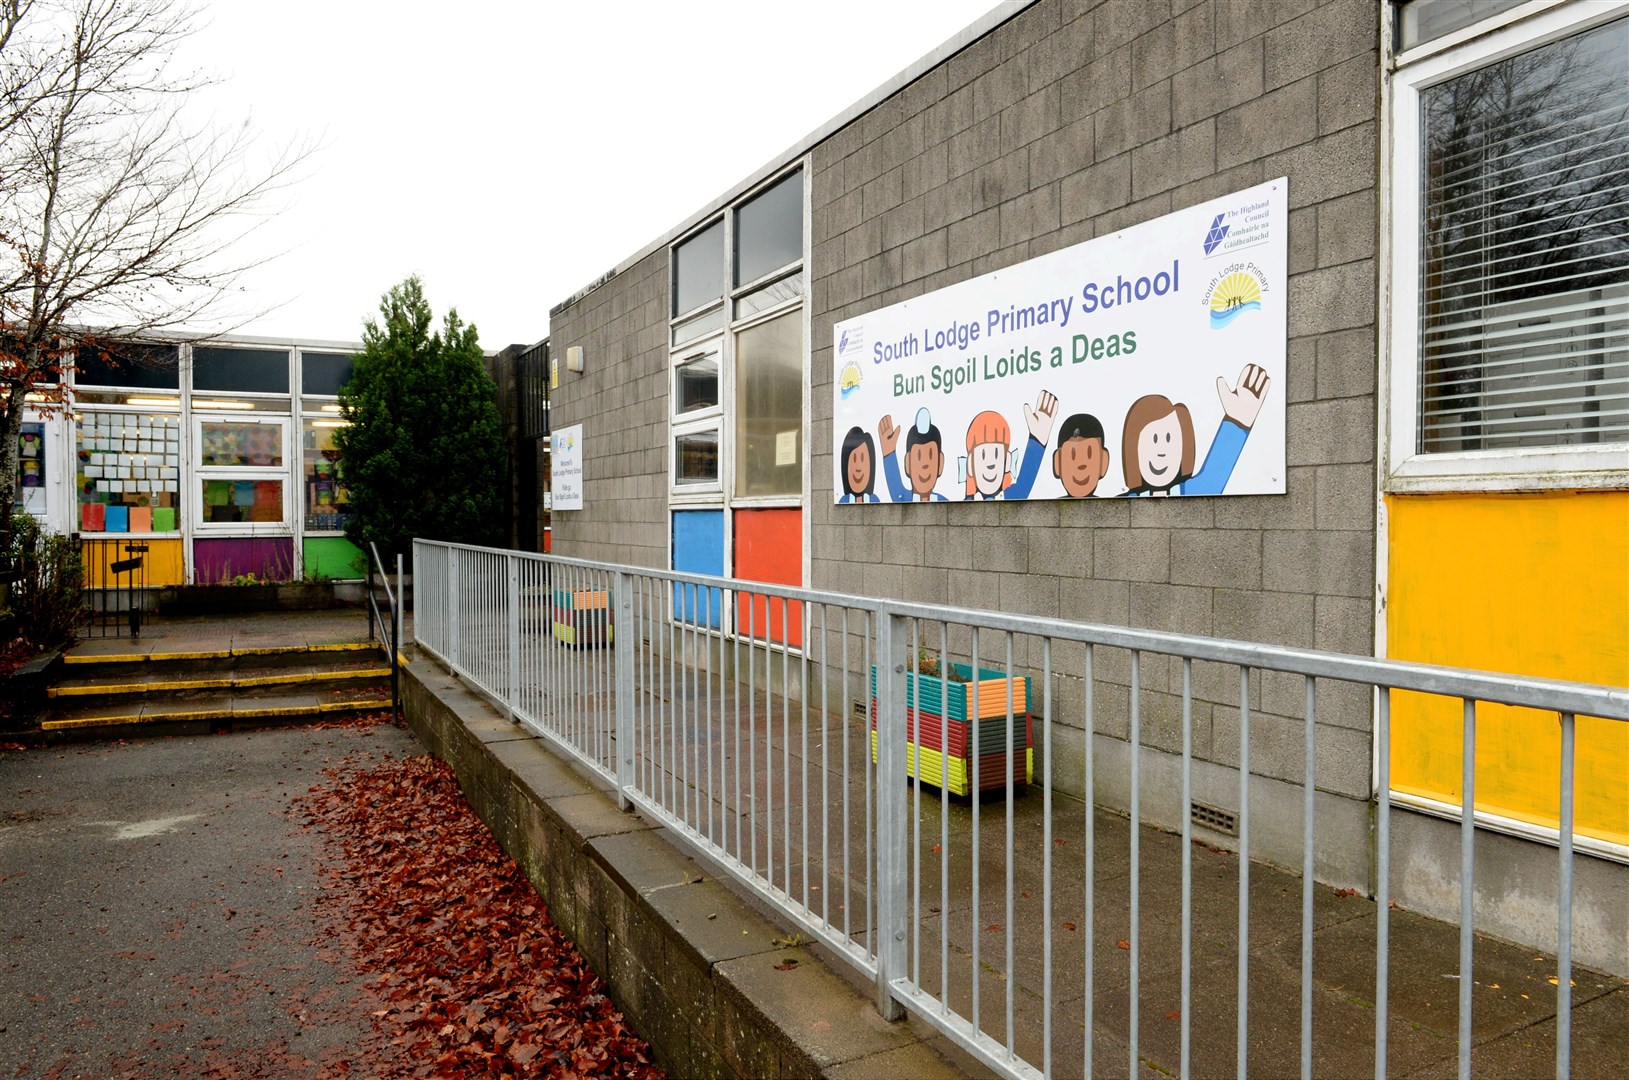 South Lodge Primary 's head teacher has said he takes the safety of children and staff extremely seriously and will share information with parents.